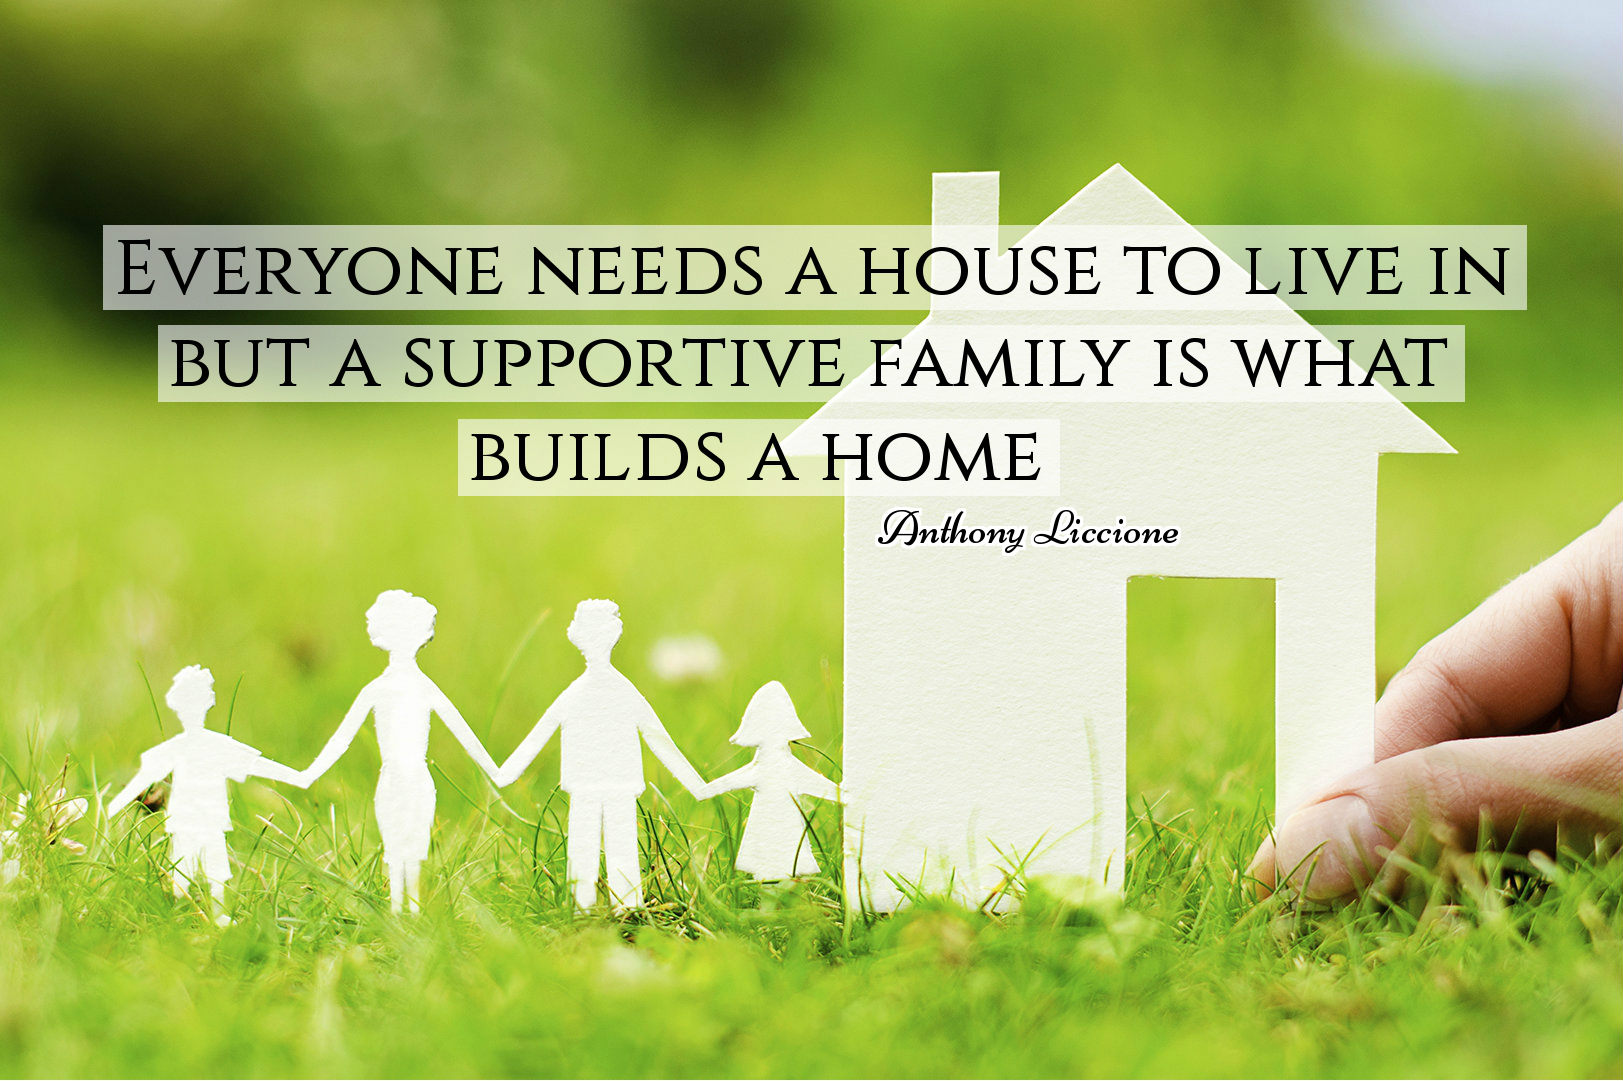 Everyone needs a house to live in but a supportive family is what builds a home. Anthony Liccione